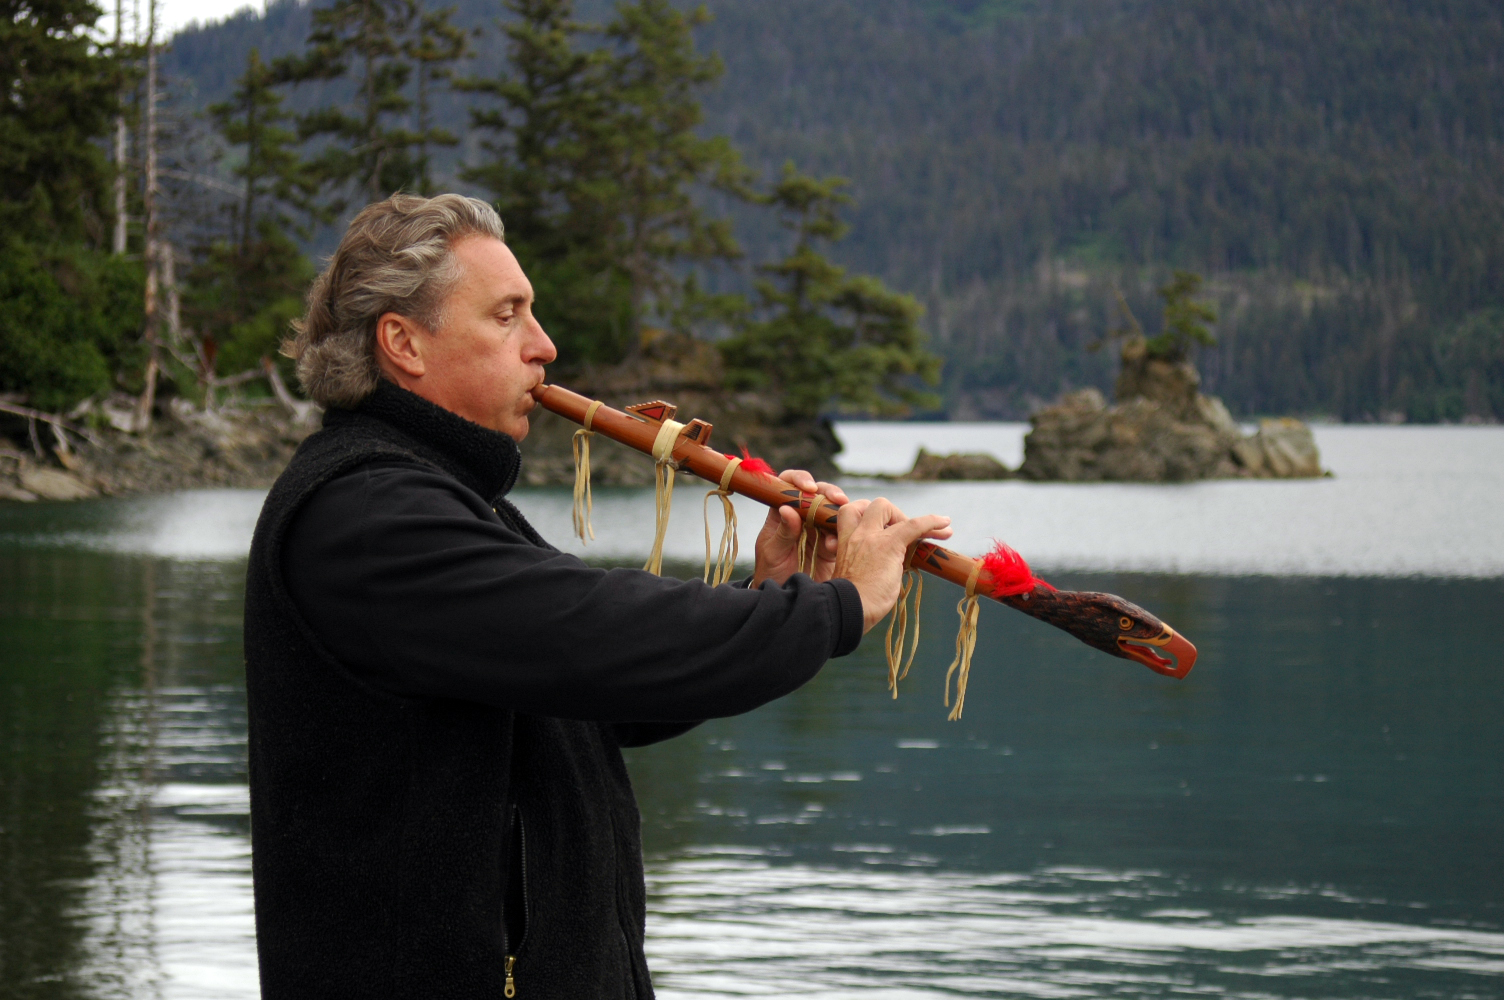 Gary Stroutsos and his eagle flute